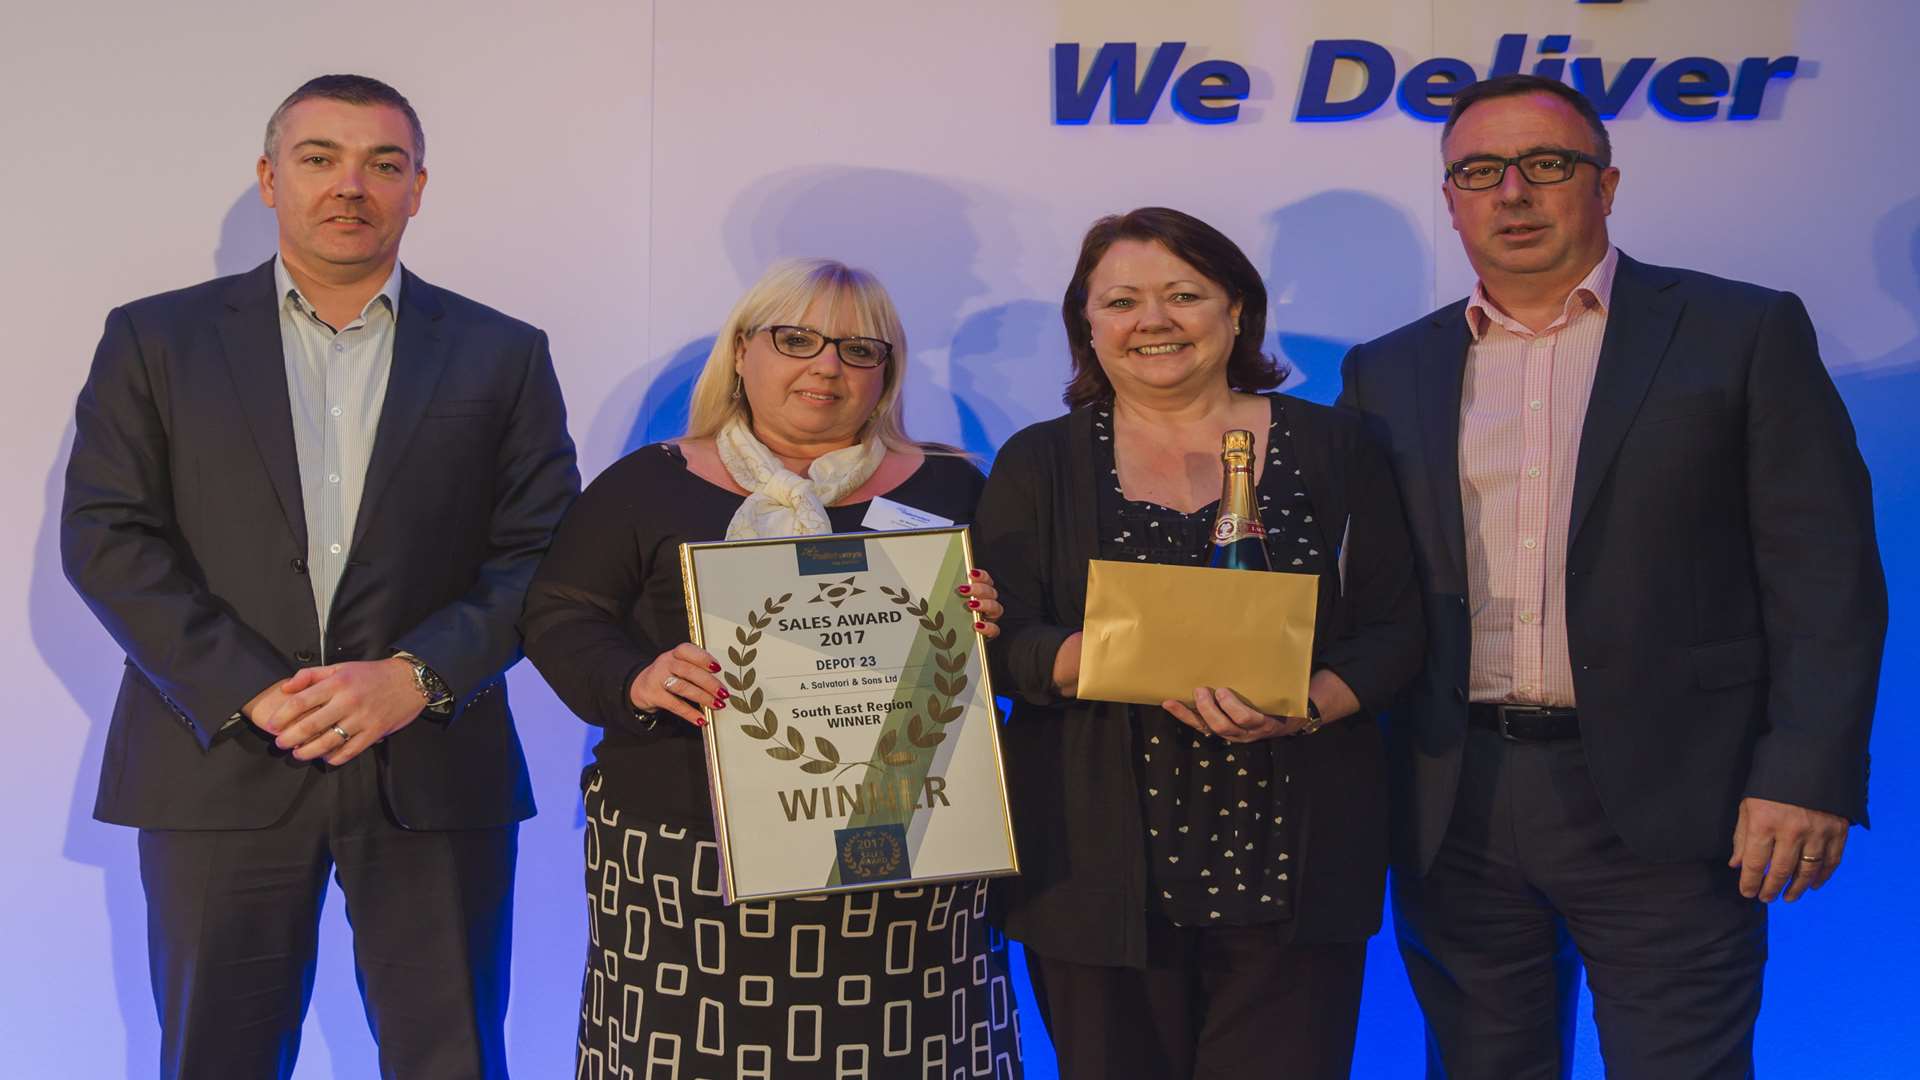 From left, Palletways network director Barry Byers, Salvatori area manager Gill McIver, Salvatori business development manager Carole Sutton and Palletways UK managing director Dave Walmsley